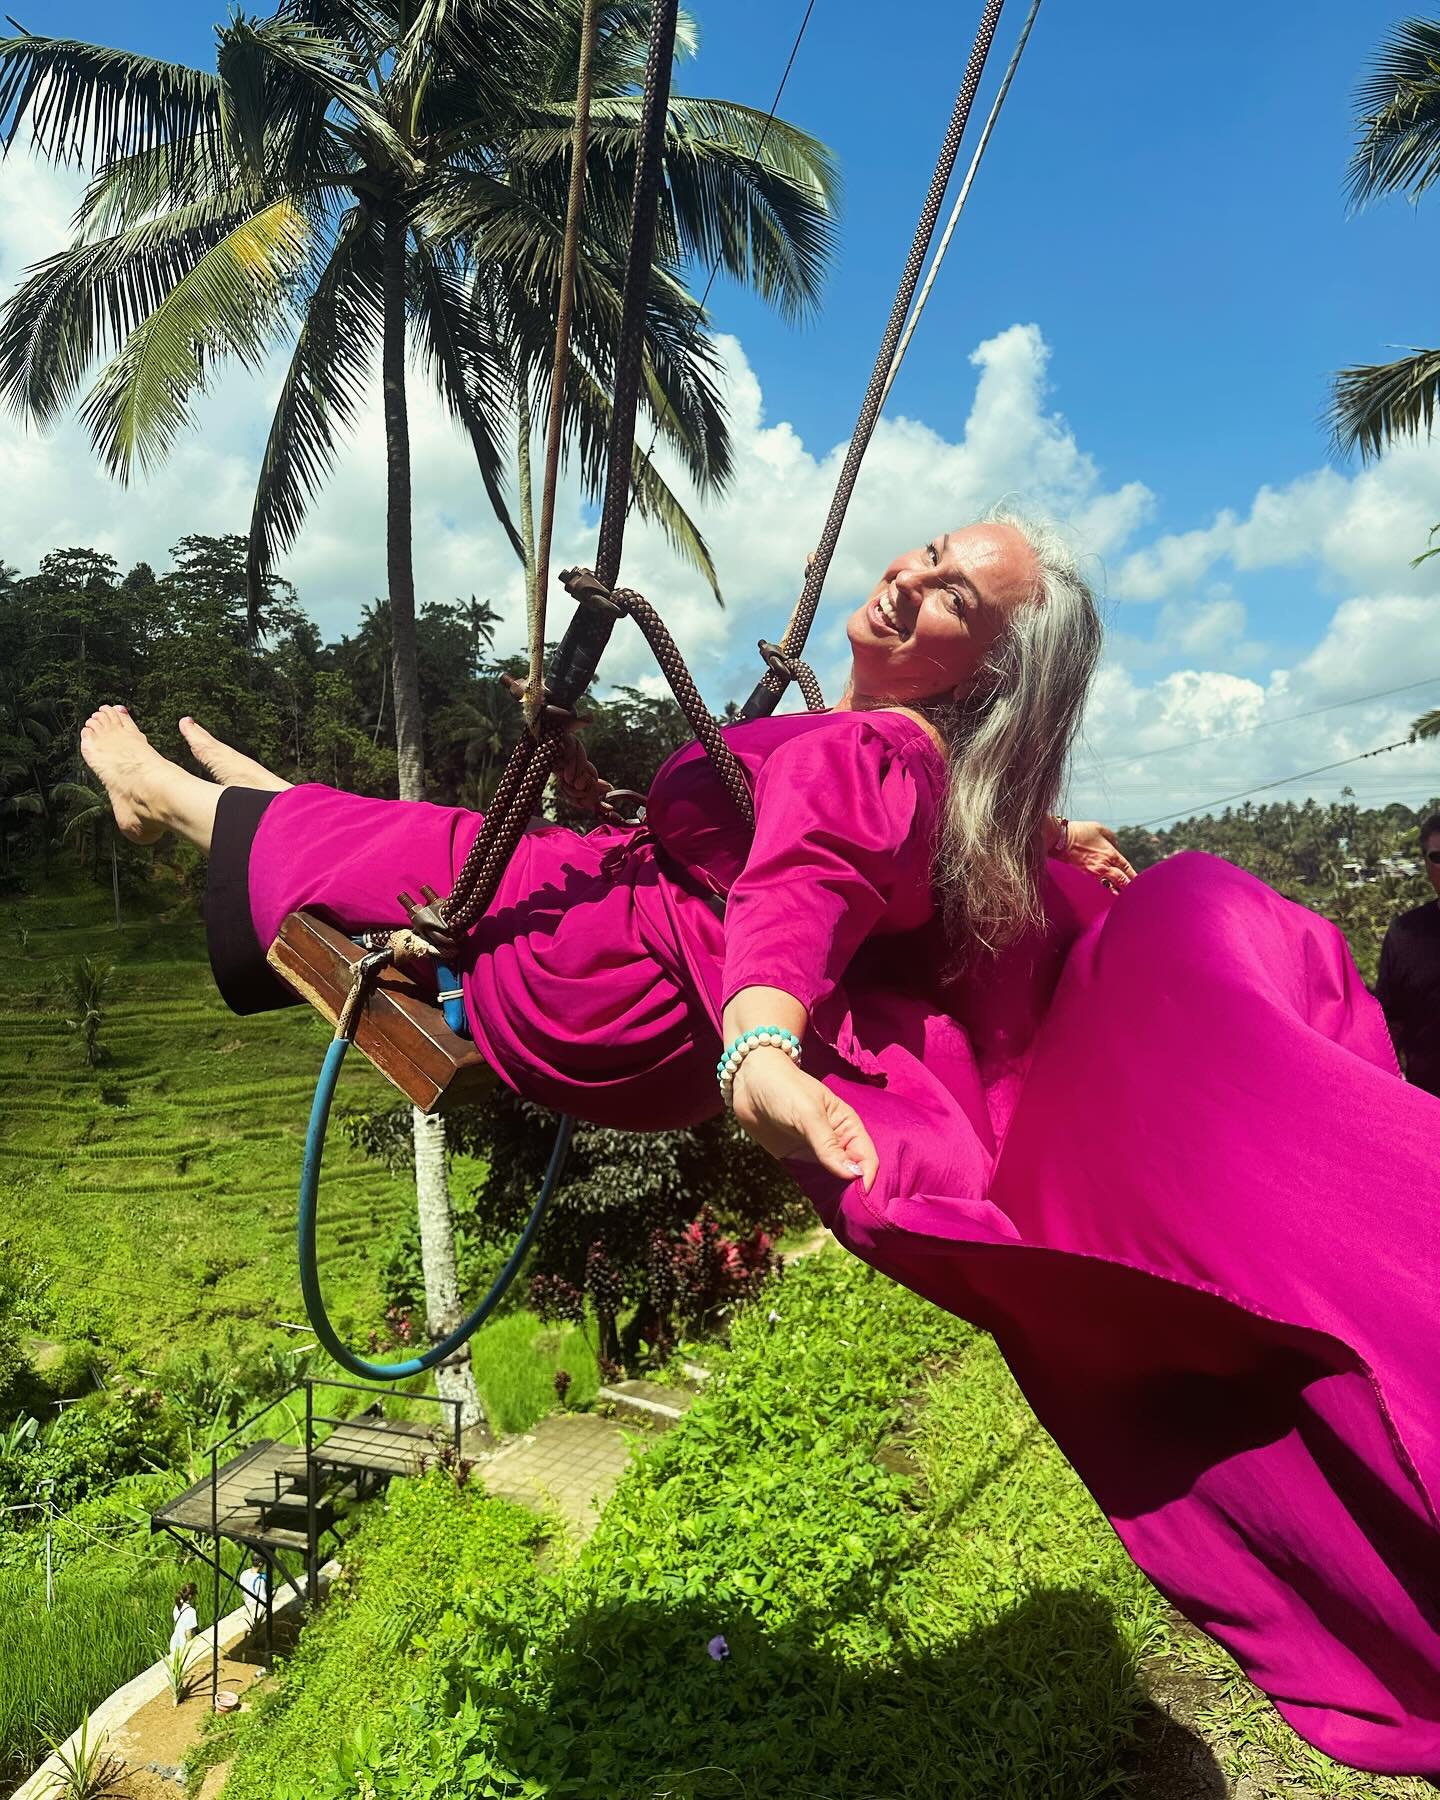 Bali Instagram check list 📋 

✅ Swing over the rice fields in flowy dress. 
✅ Laugh with a wise elder.
✅ Selfie with a monkey.

I made up that middle thing. 🙃 #bali #vibologie